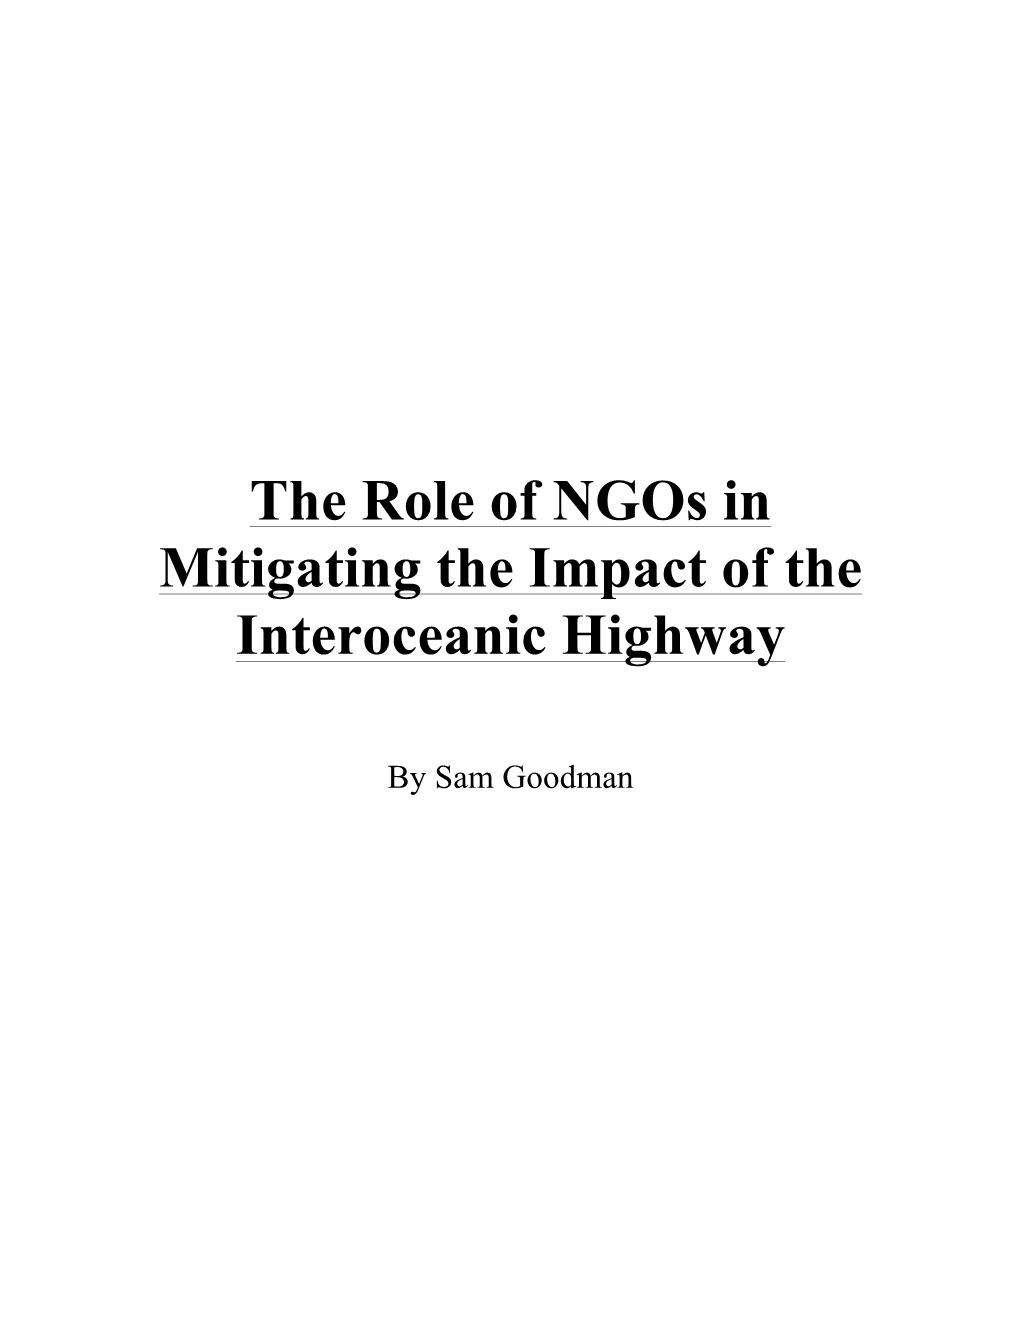 The Role of Ngos in Mitigating the Impact of the Interoceanic Highway